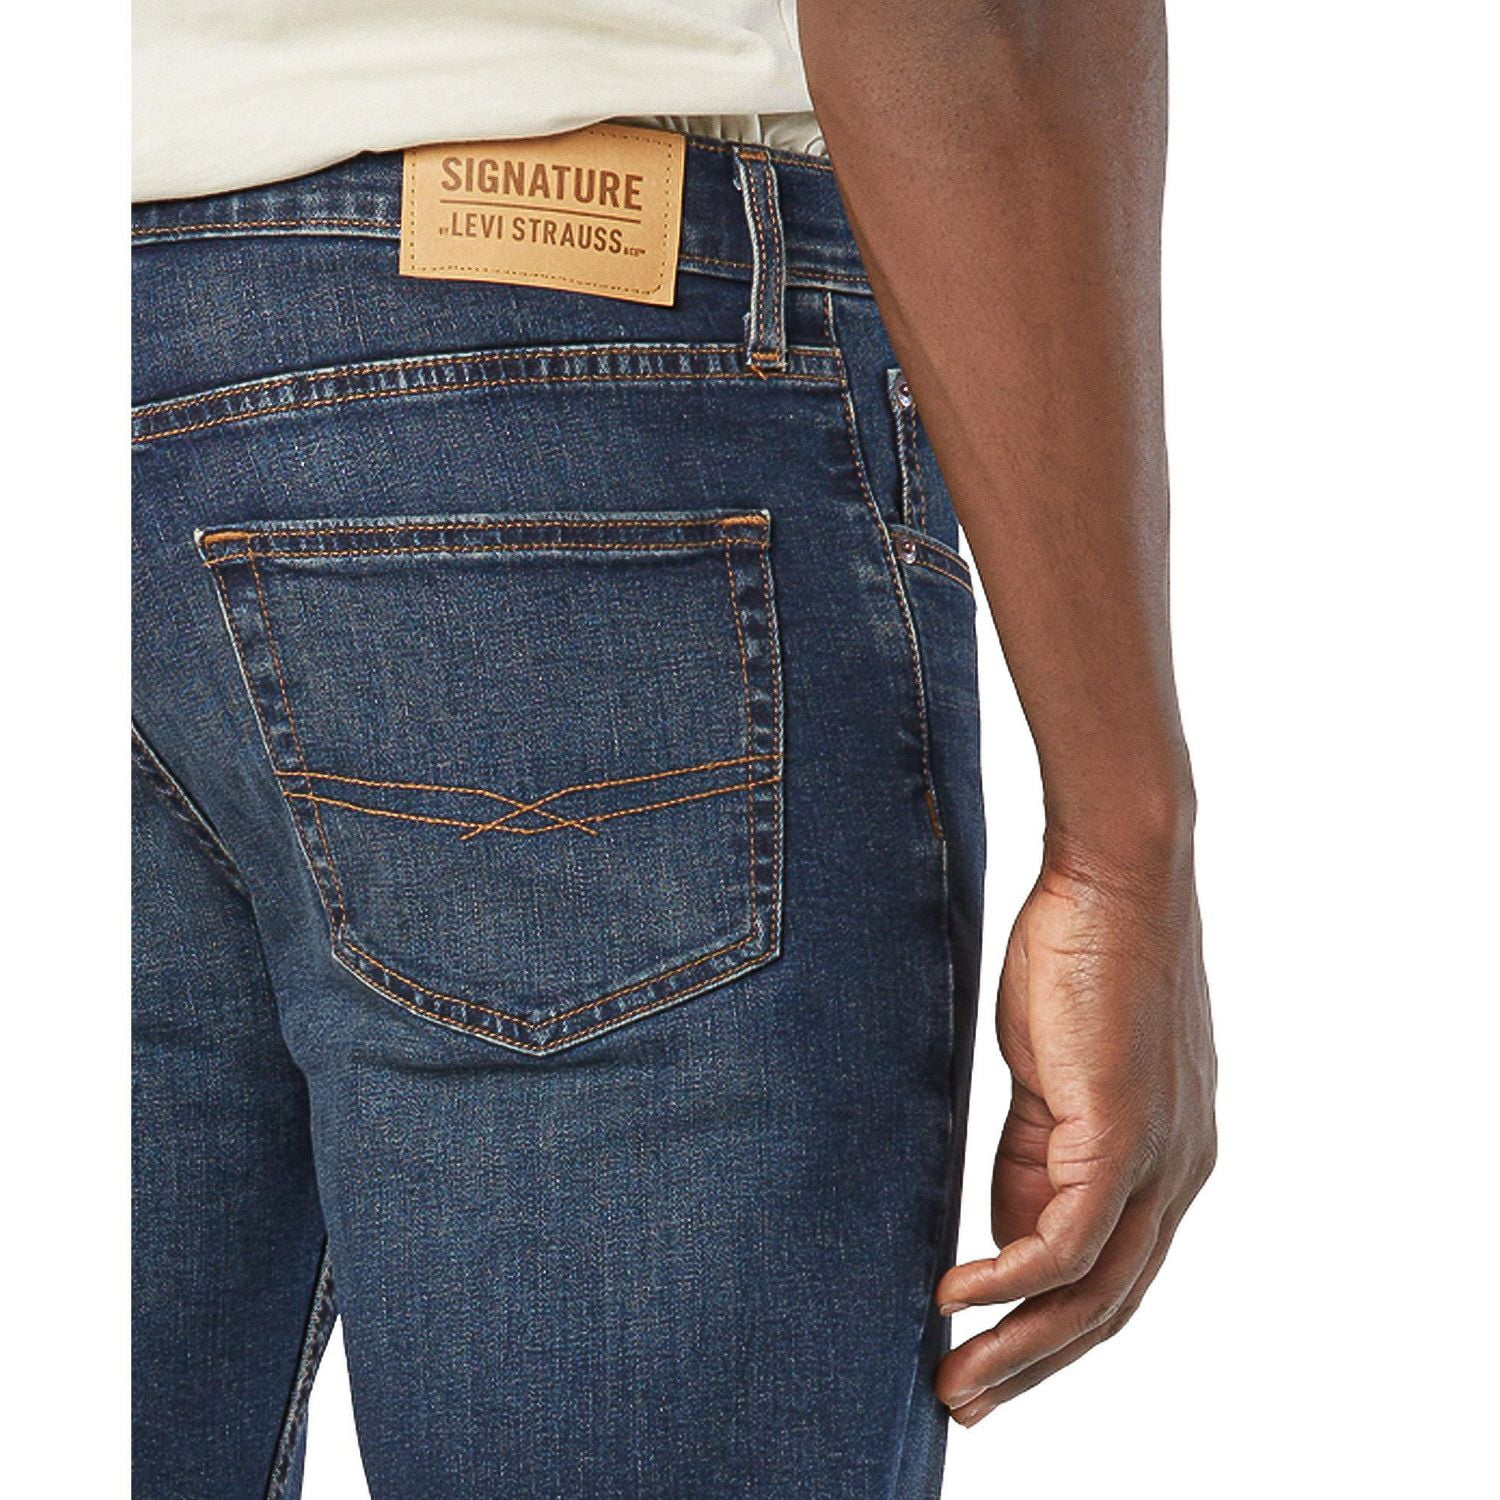 Signature by Levi Strauss & Co.® Men's Slim Fit Jeans, Available